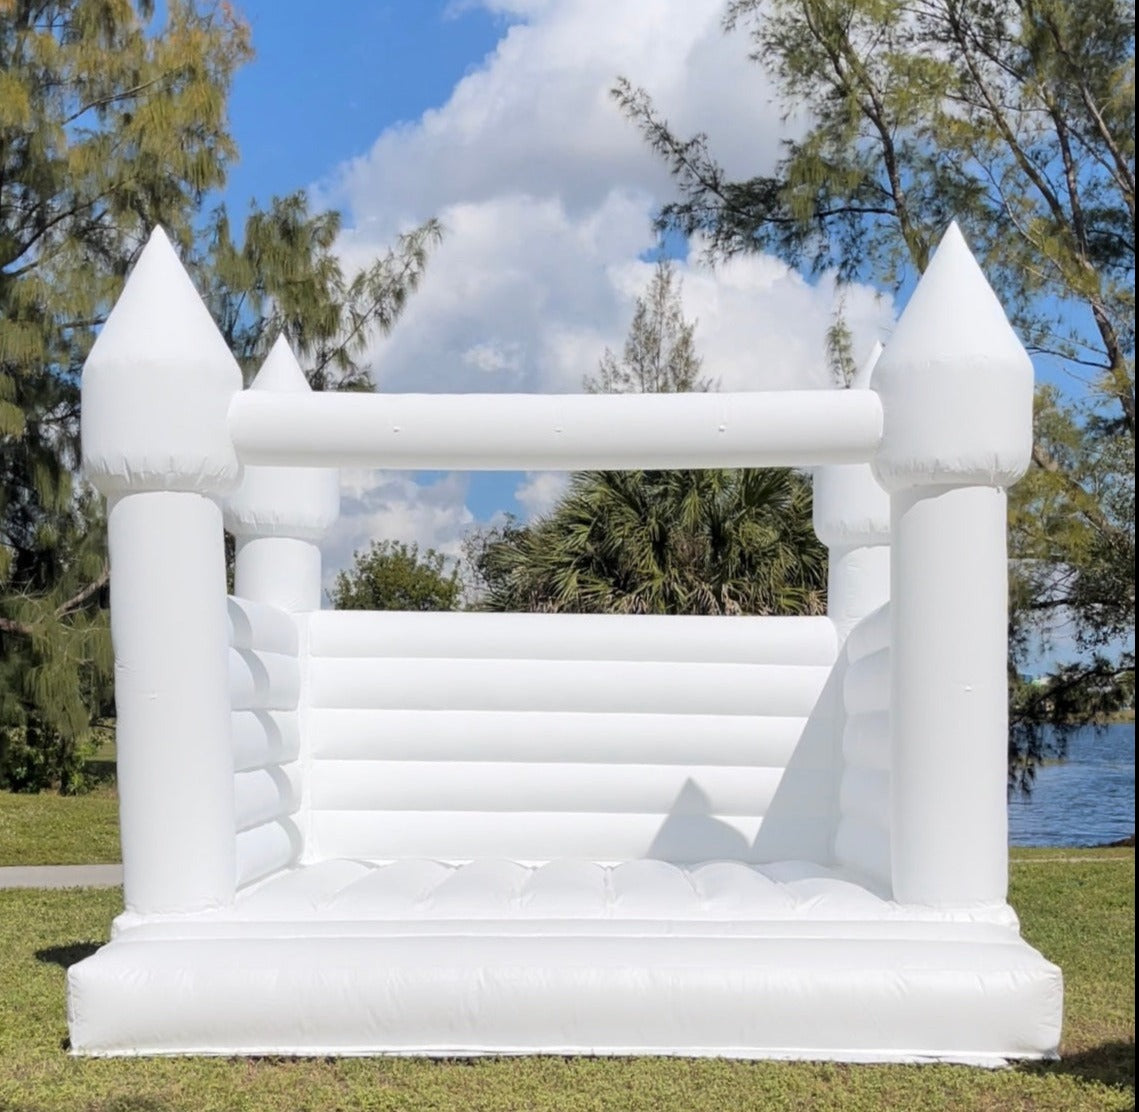 White Bounce House for rent, bounce house decor, ballon garland decor, free delivery miami dade and broward county, beautiful bounce house, castle bounce house, party decor